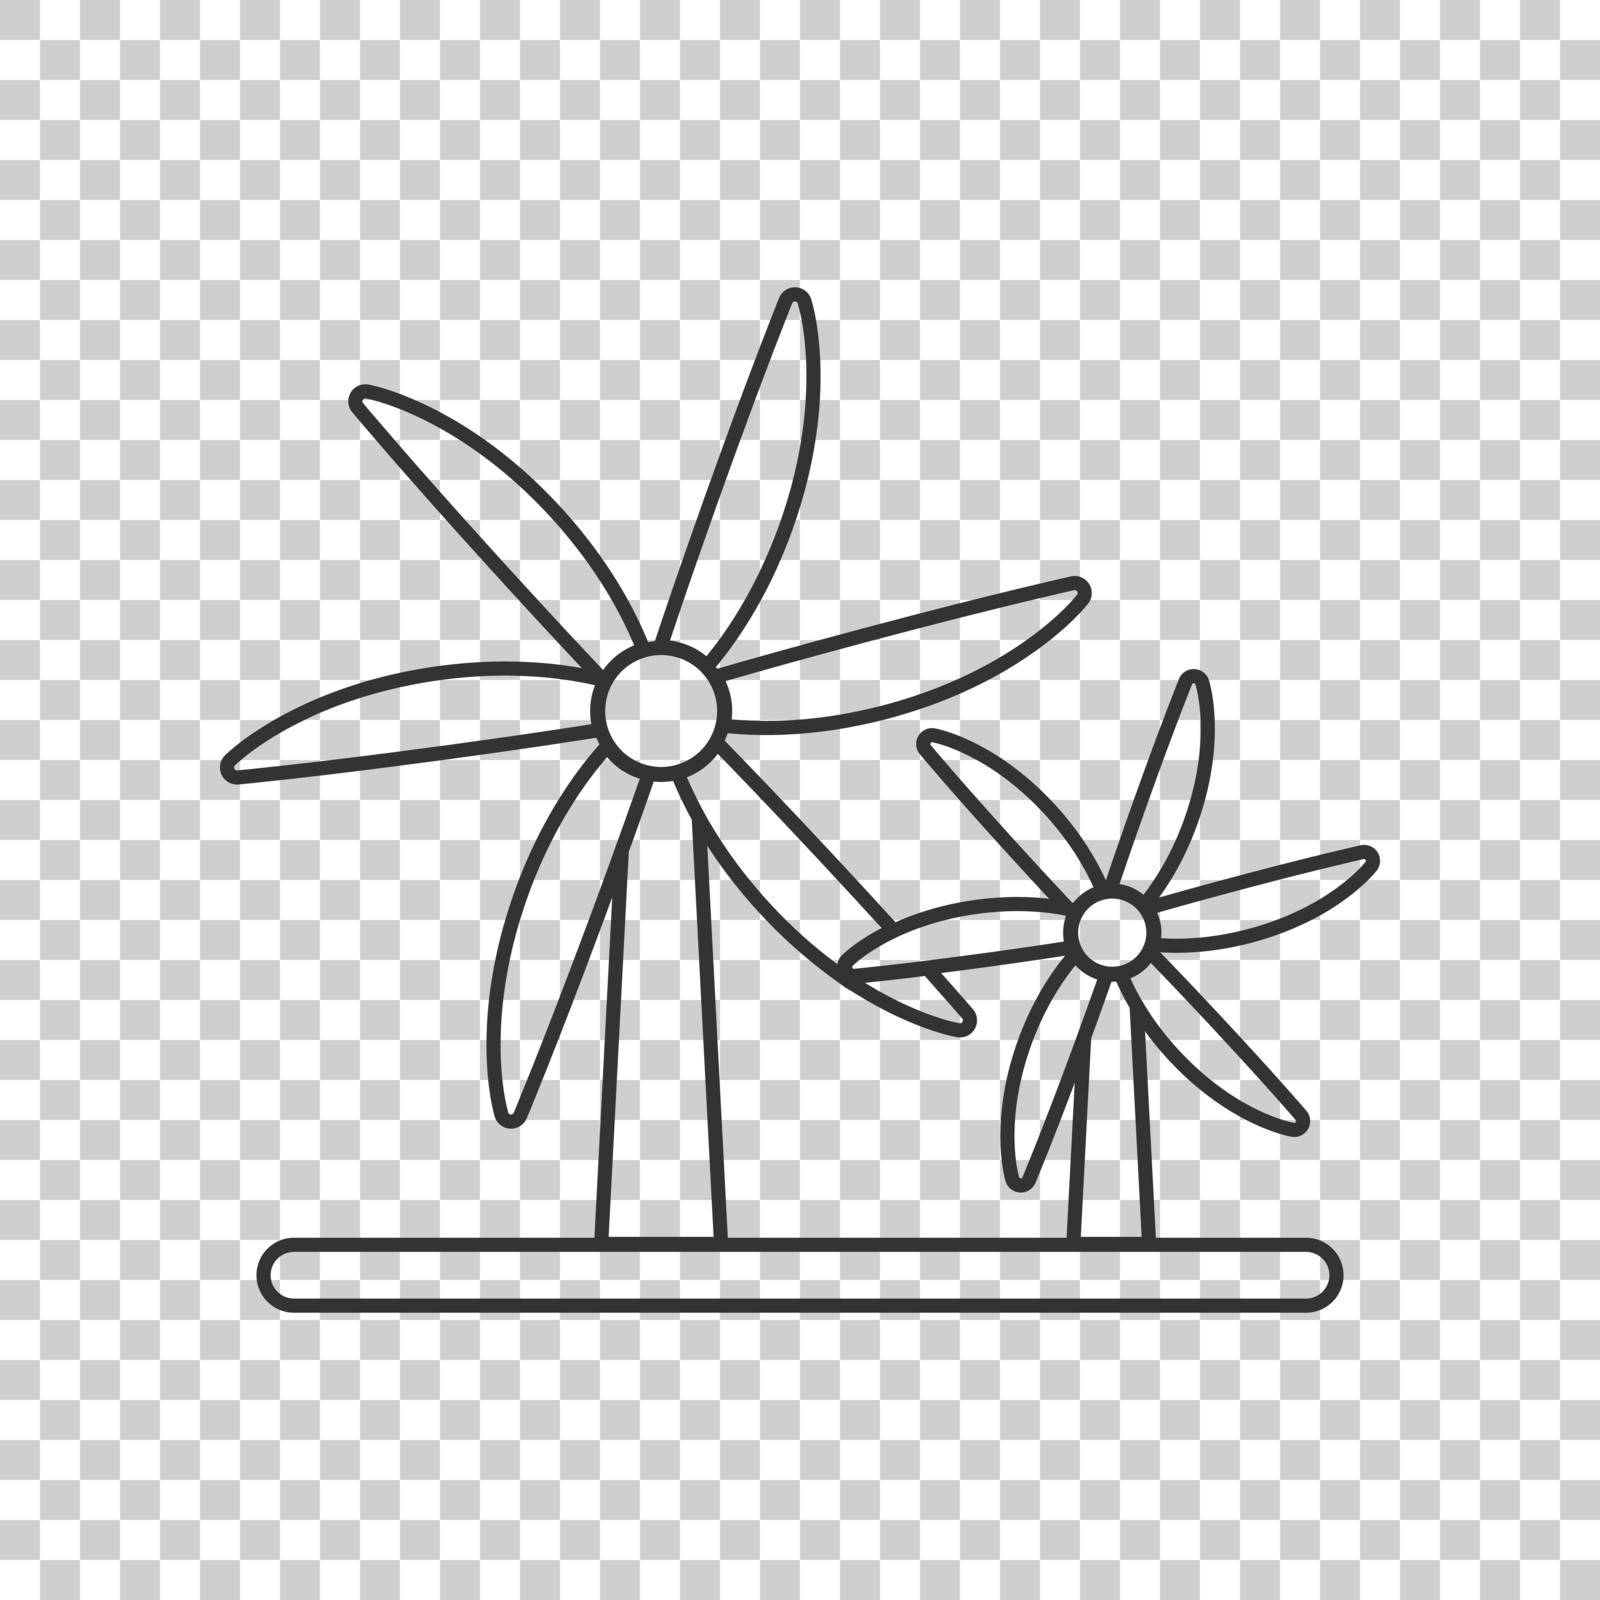 Wind power plant icon in flat style. Turbine vector illustration on white isolated background. Air energy sign business concept. by LysenkoA